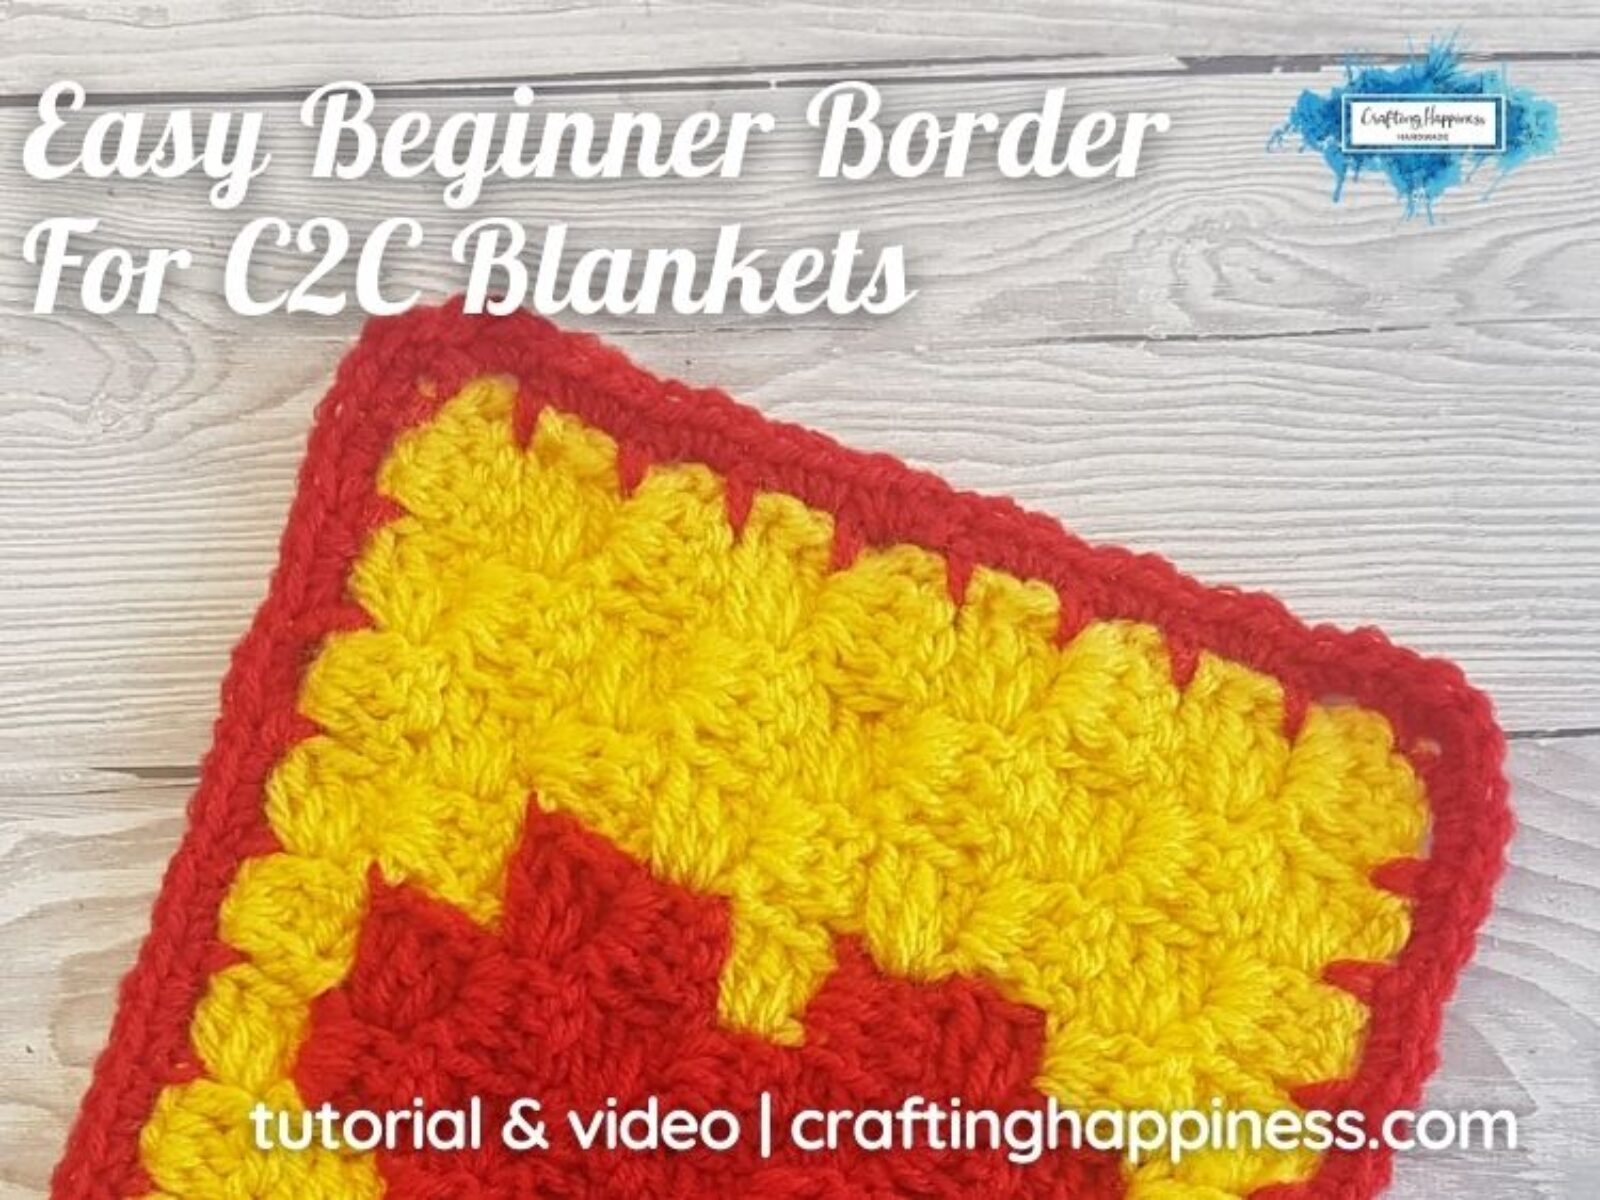 FB BLOG POSTER - Easy Border For C2C Blankets _ Crafting Happiness